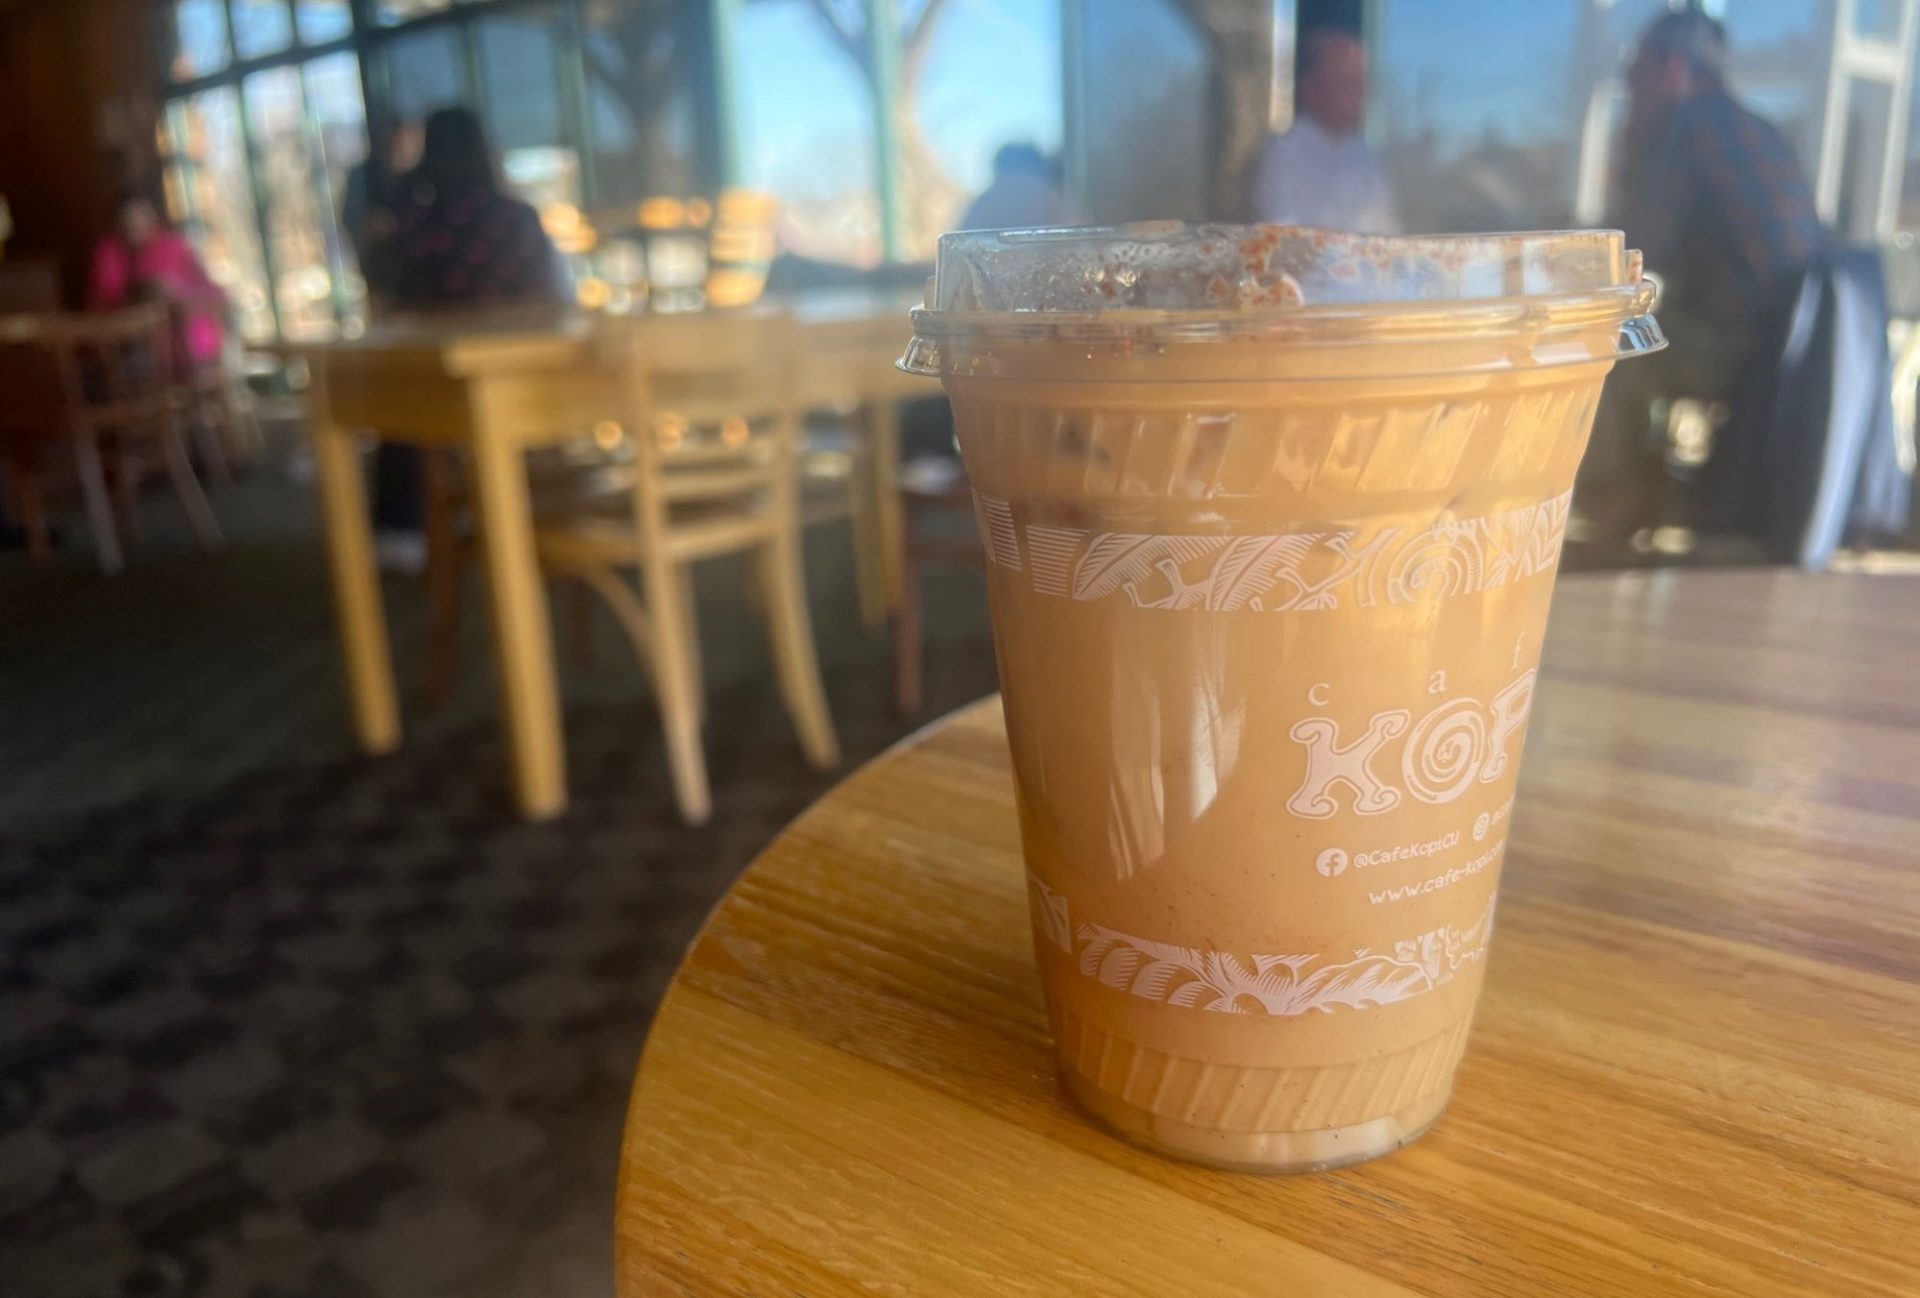 An iced latte in a clear plastic cup, sitting on a round wooden table in Espresso Royale.